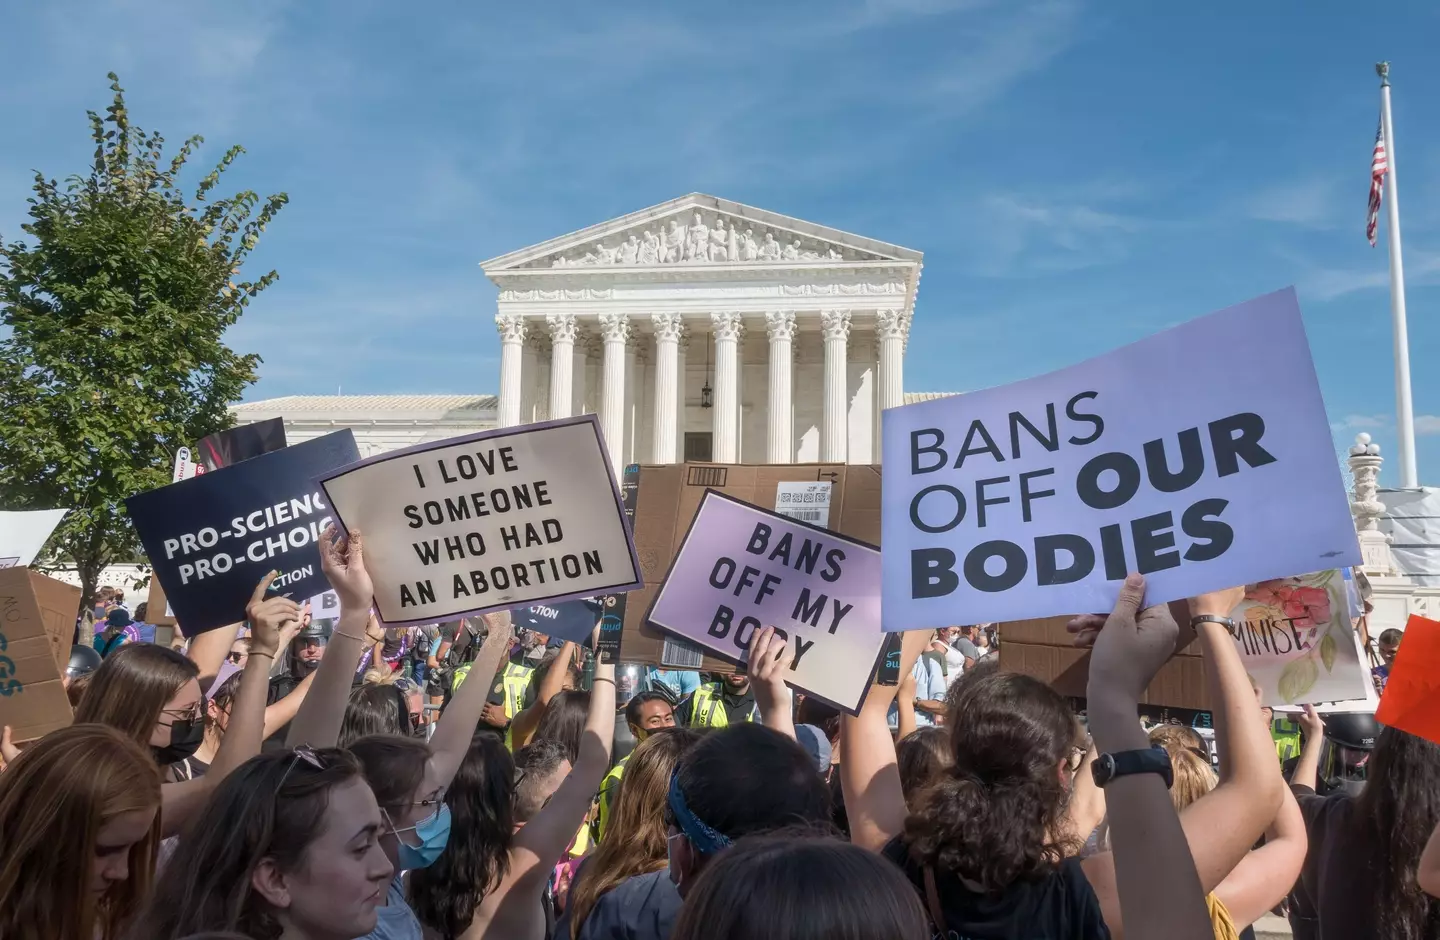 Large protests have been held against the Supreme Court's decision to overturn Roe v Wade.